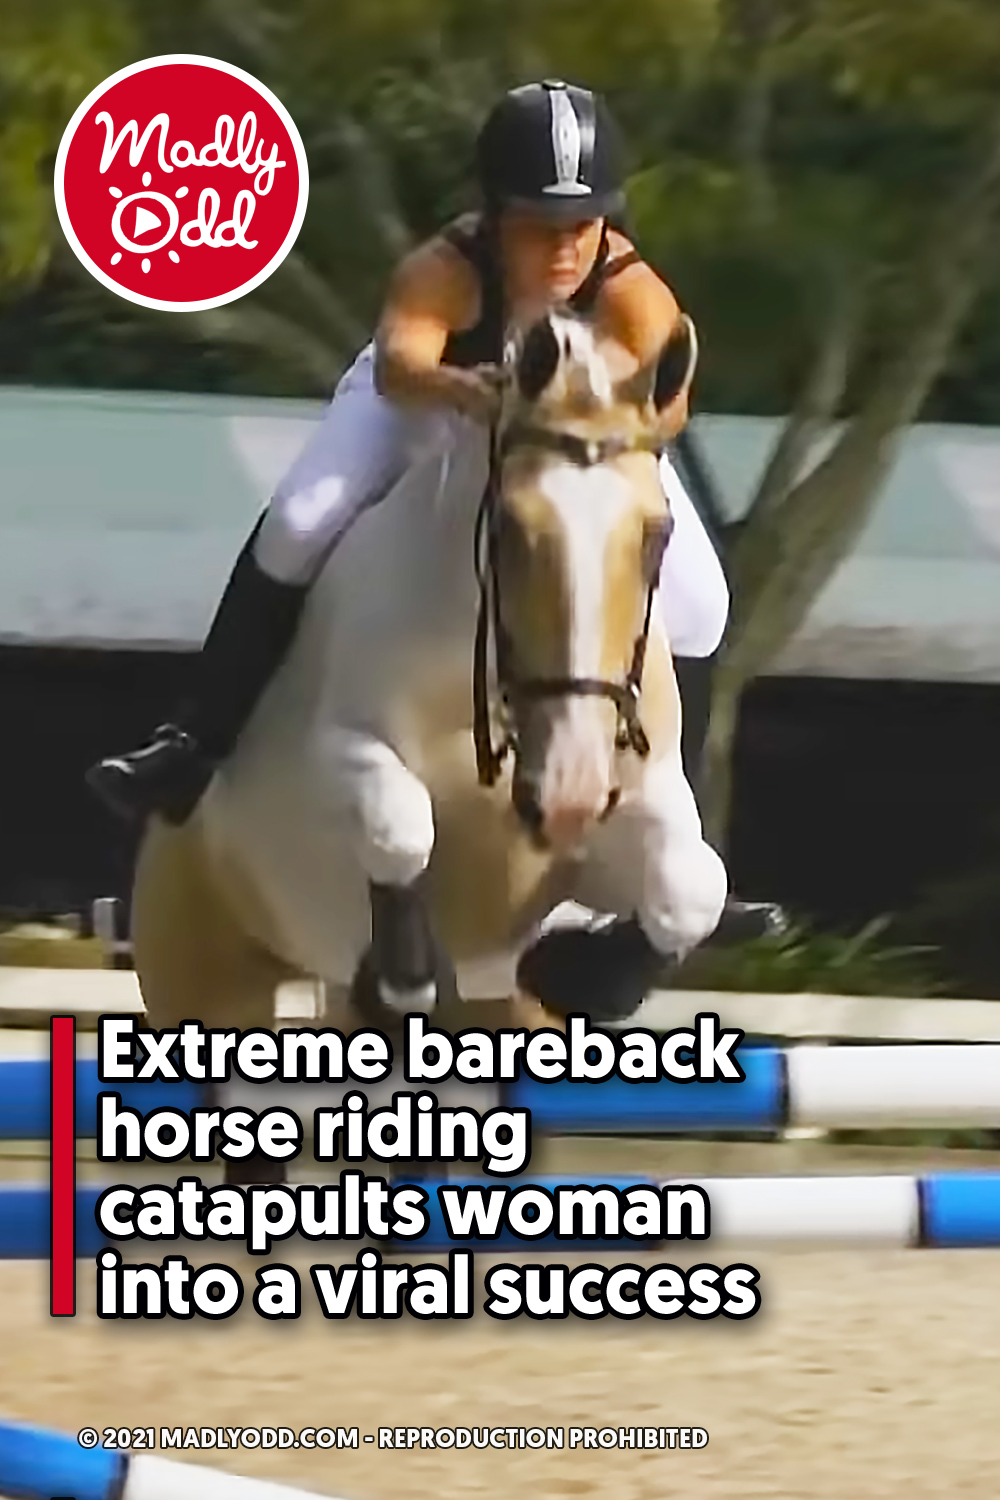 Extreme bareback horse riding catapults woman into a viral success